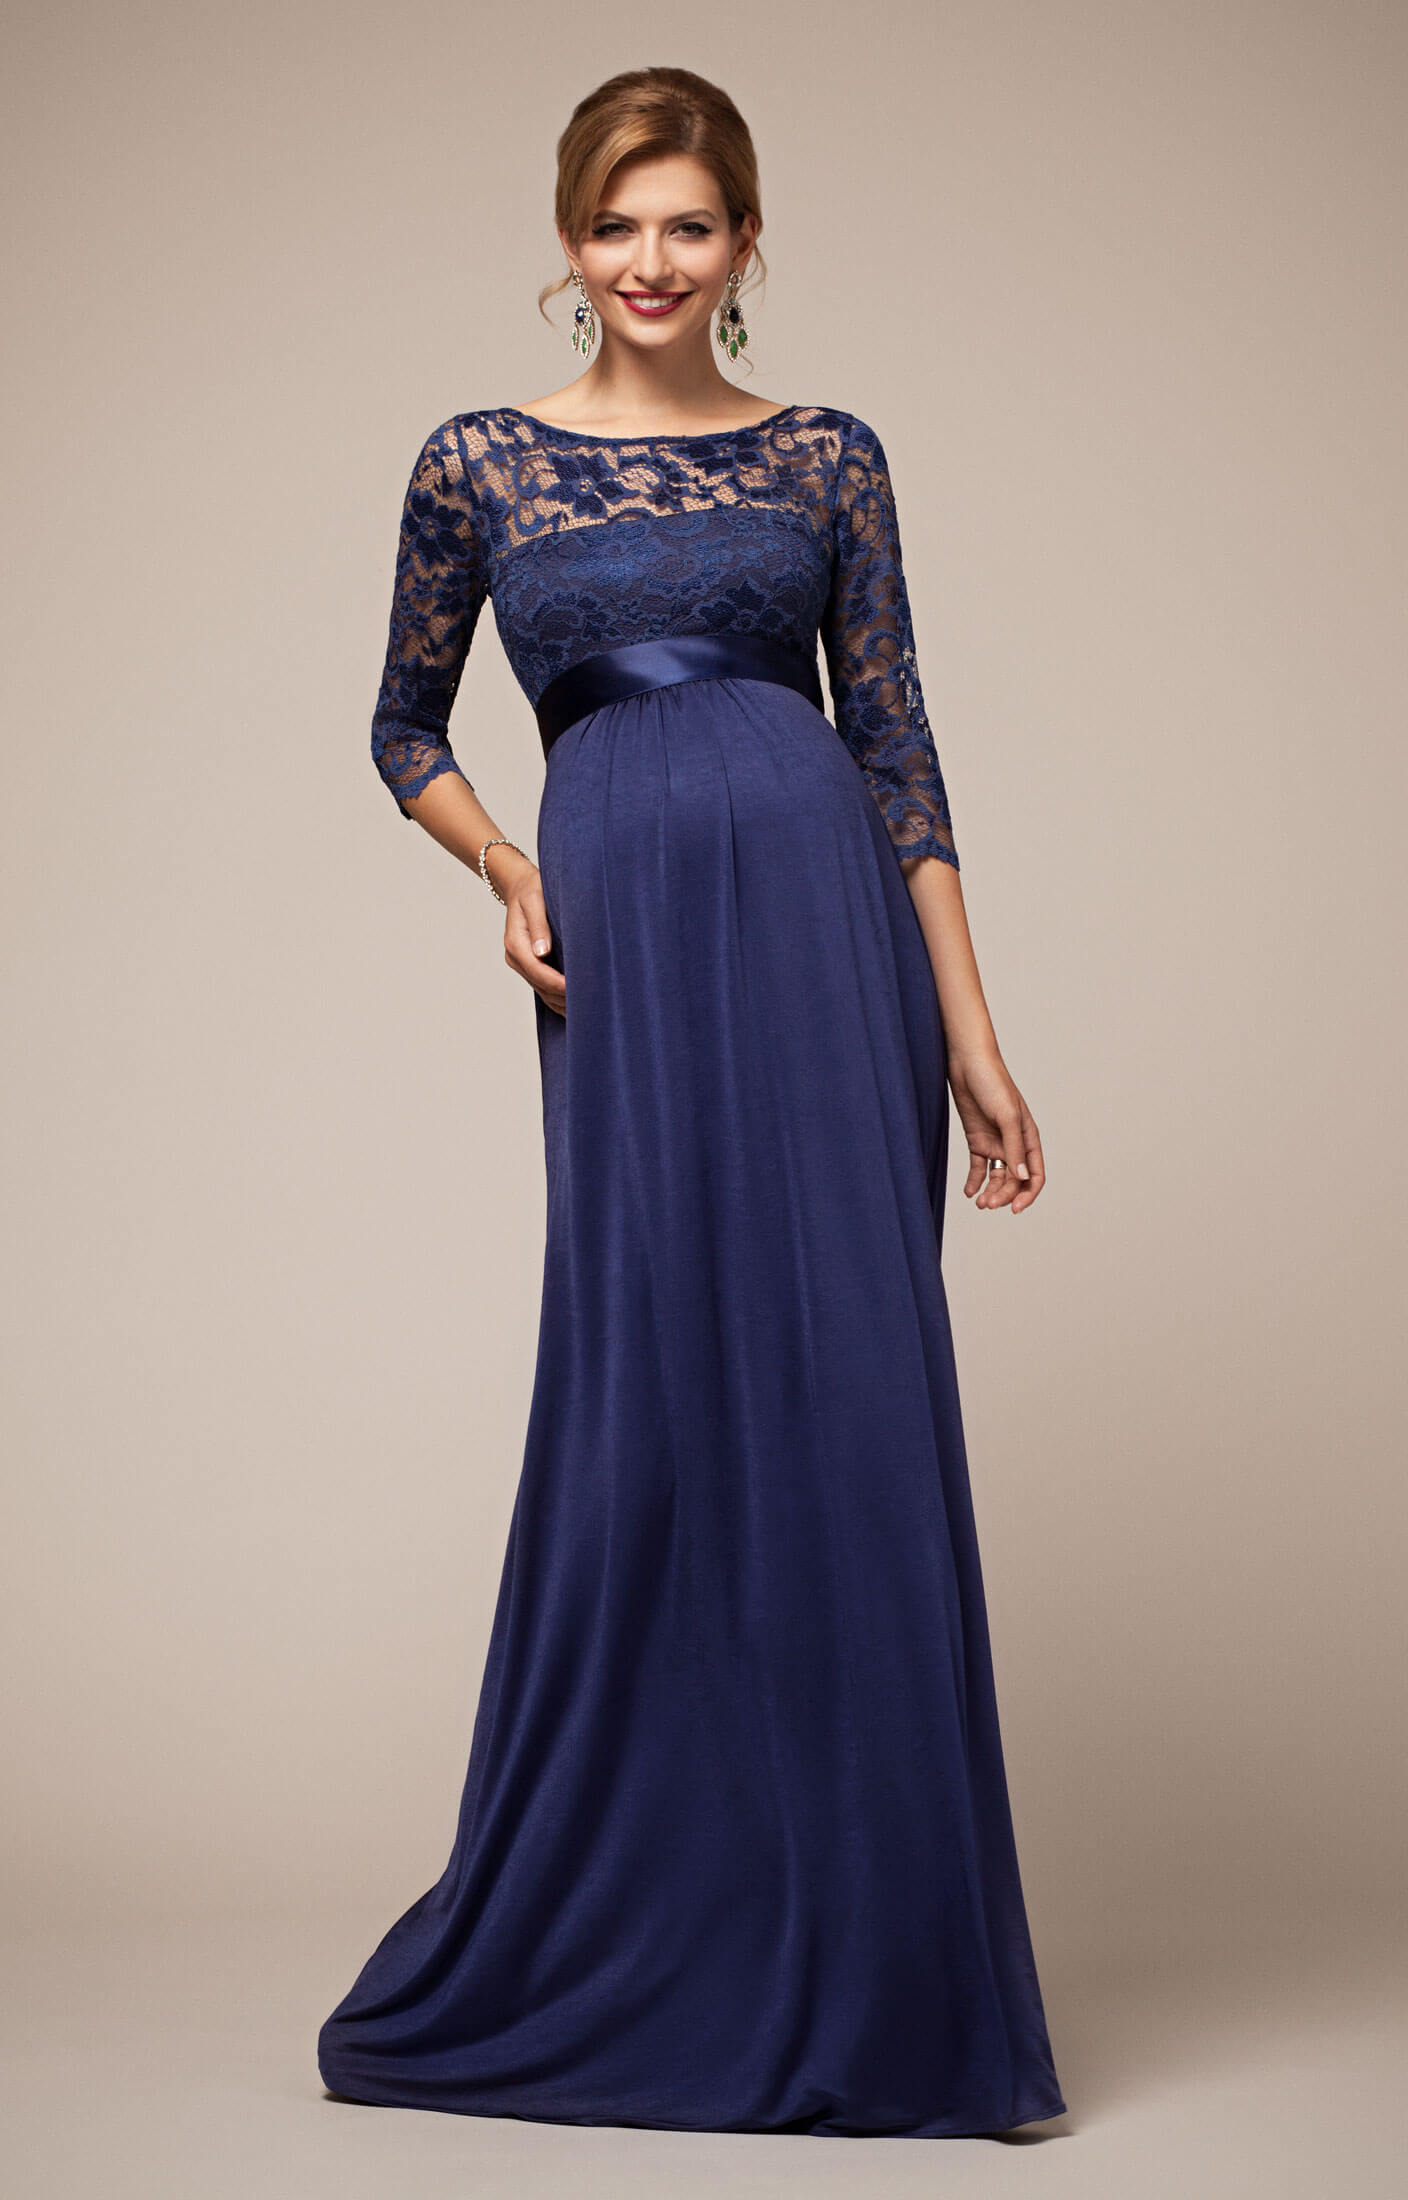 Top Maternity Dresses Formal Wedding of all time Check it out now 